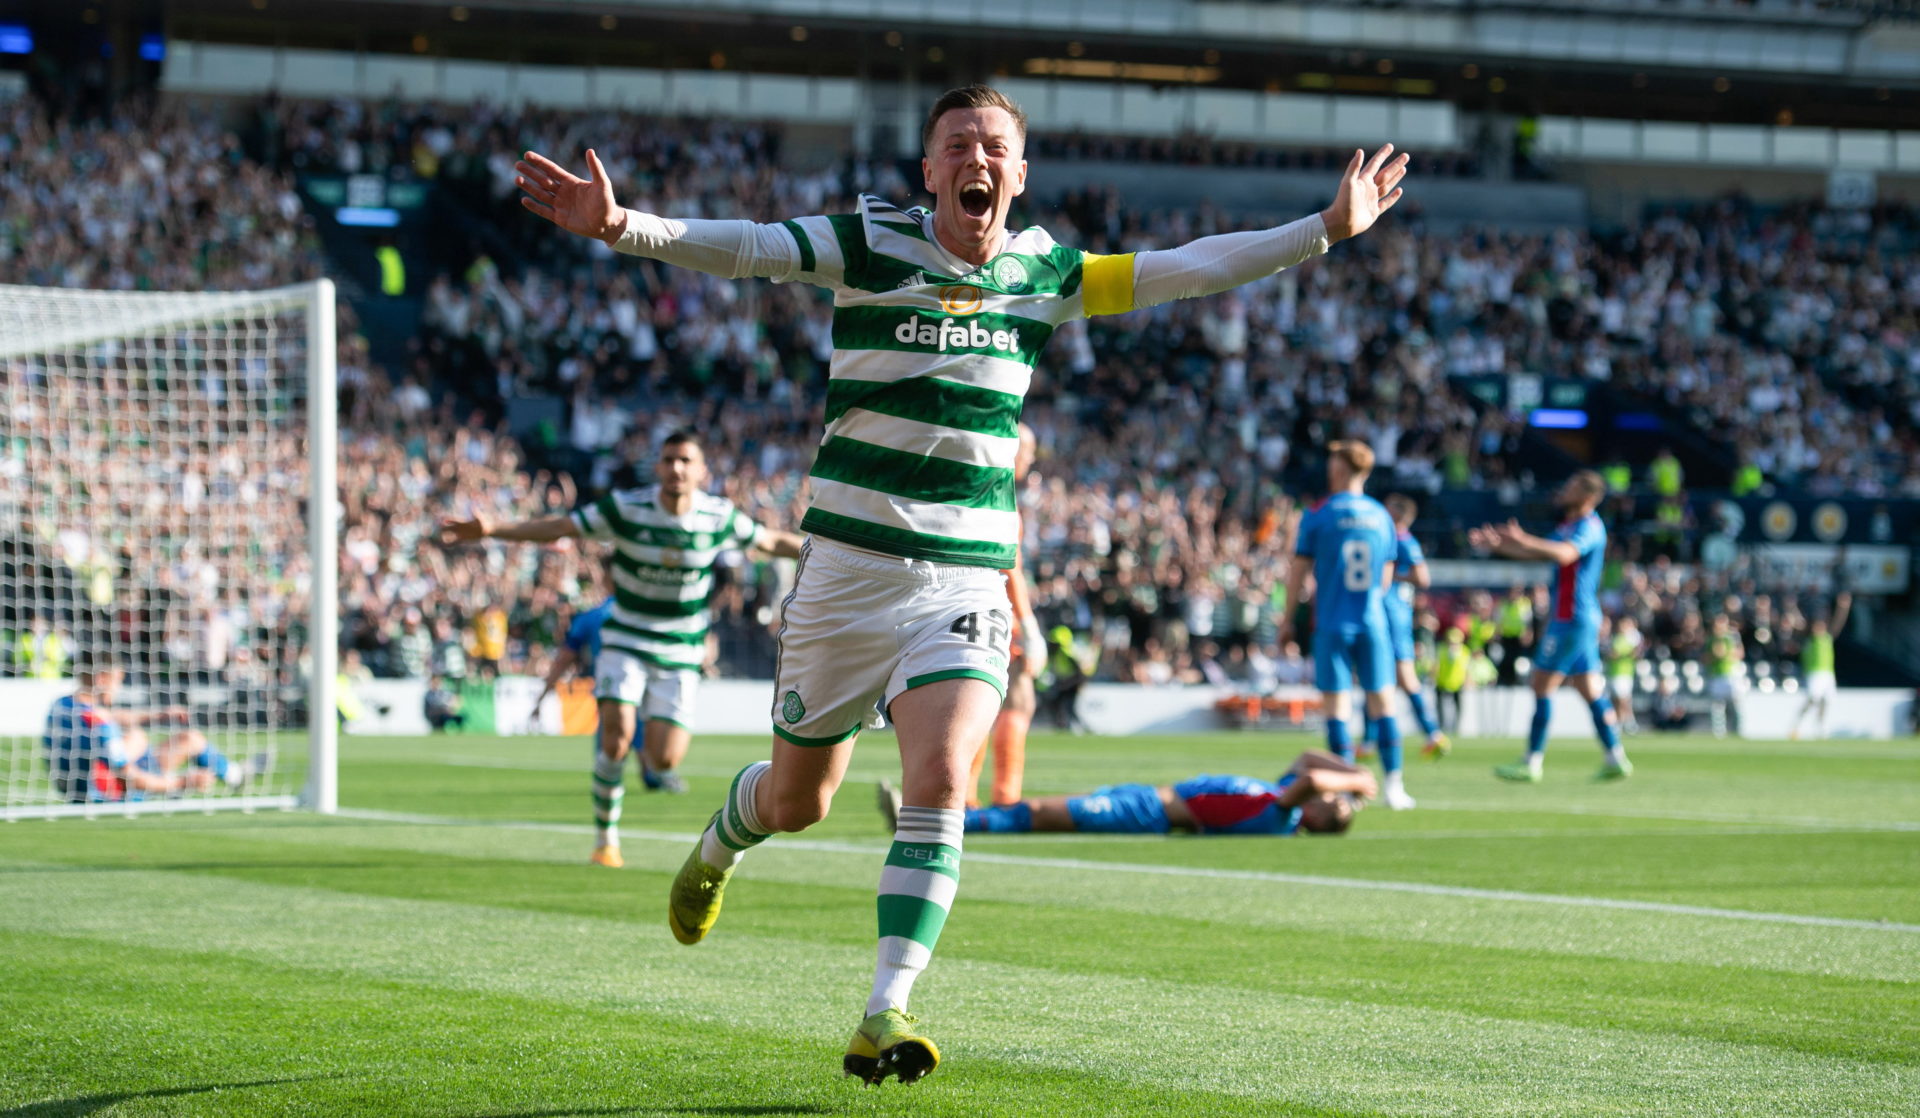 Celtic complete domestic clean sweep with Scottish Cup win